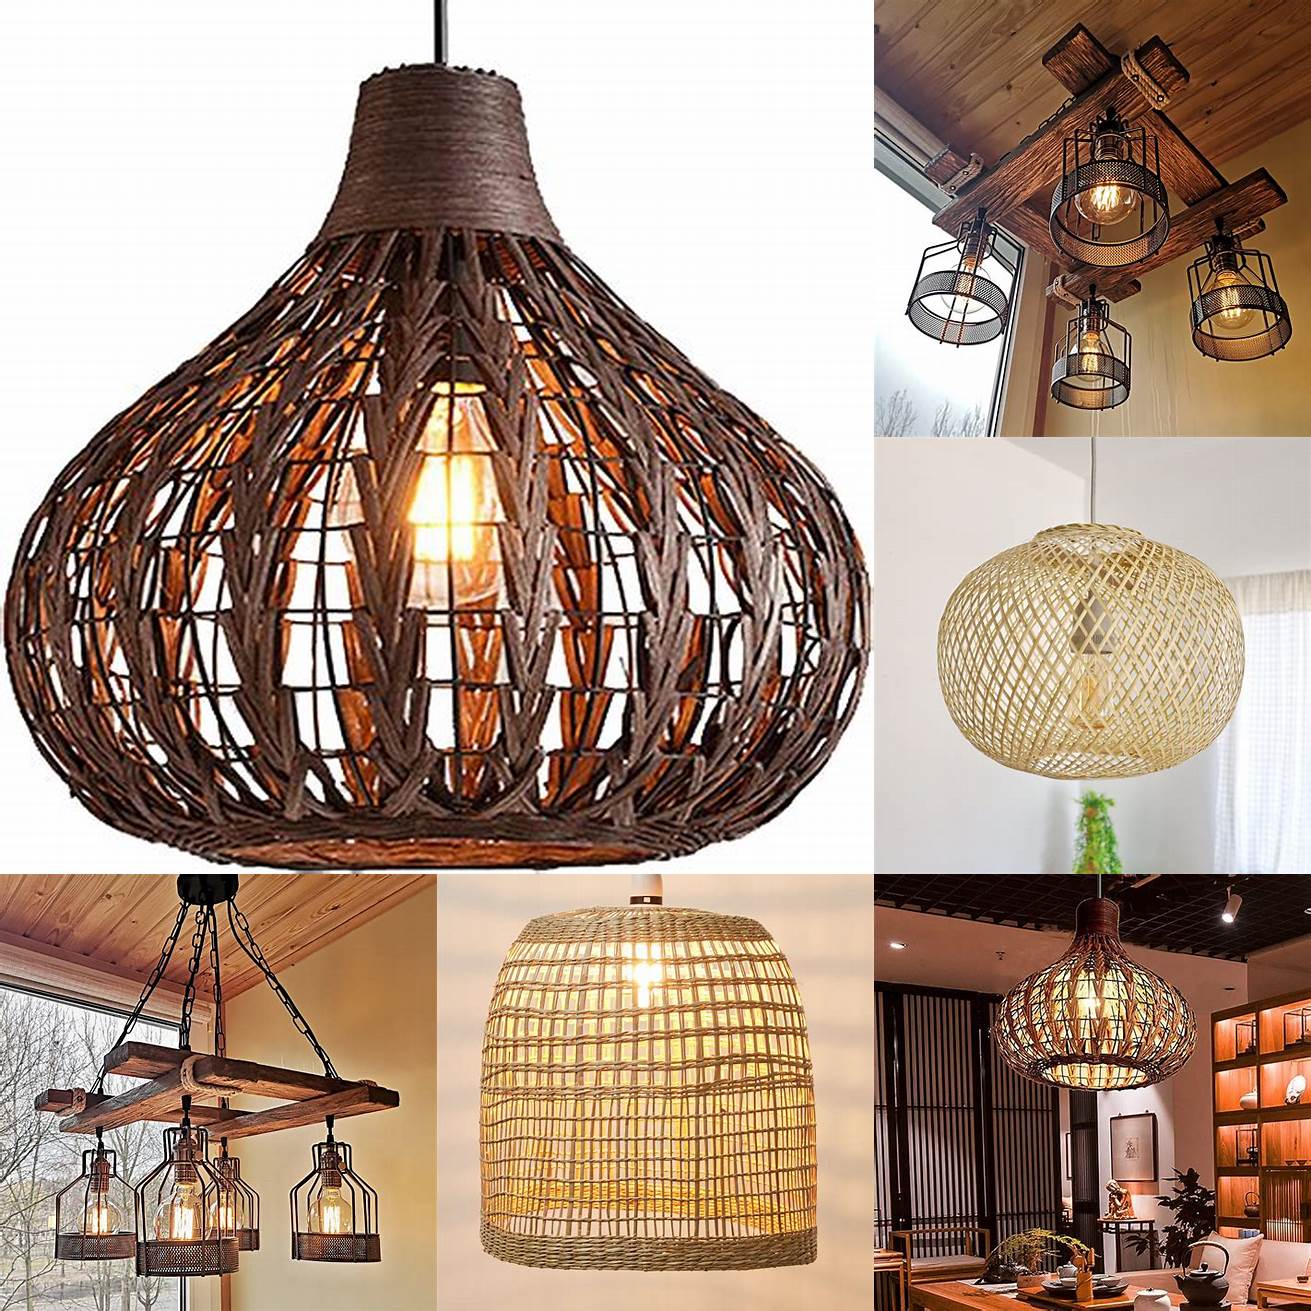 Rustic wooden pendant lights with woven shades